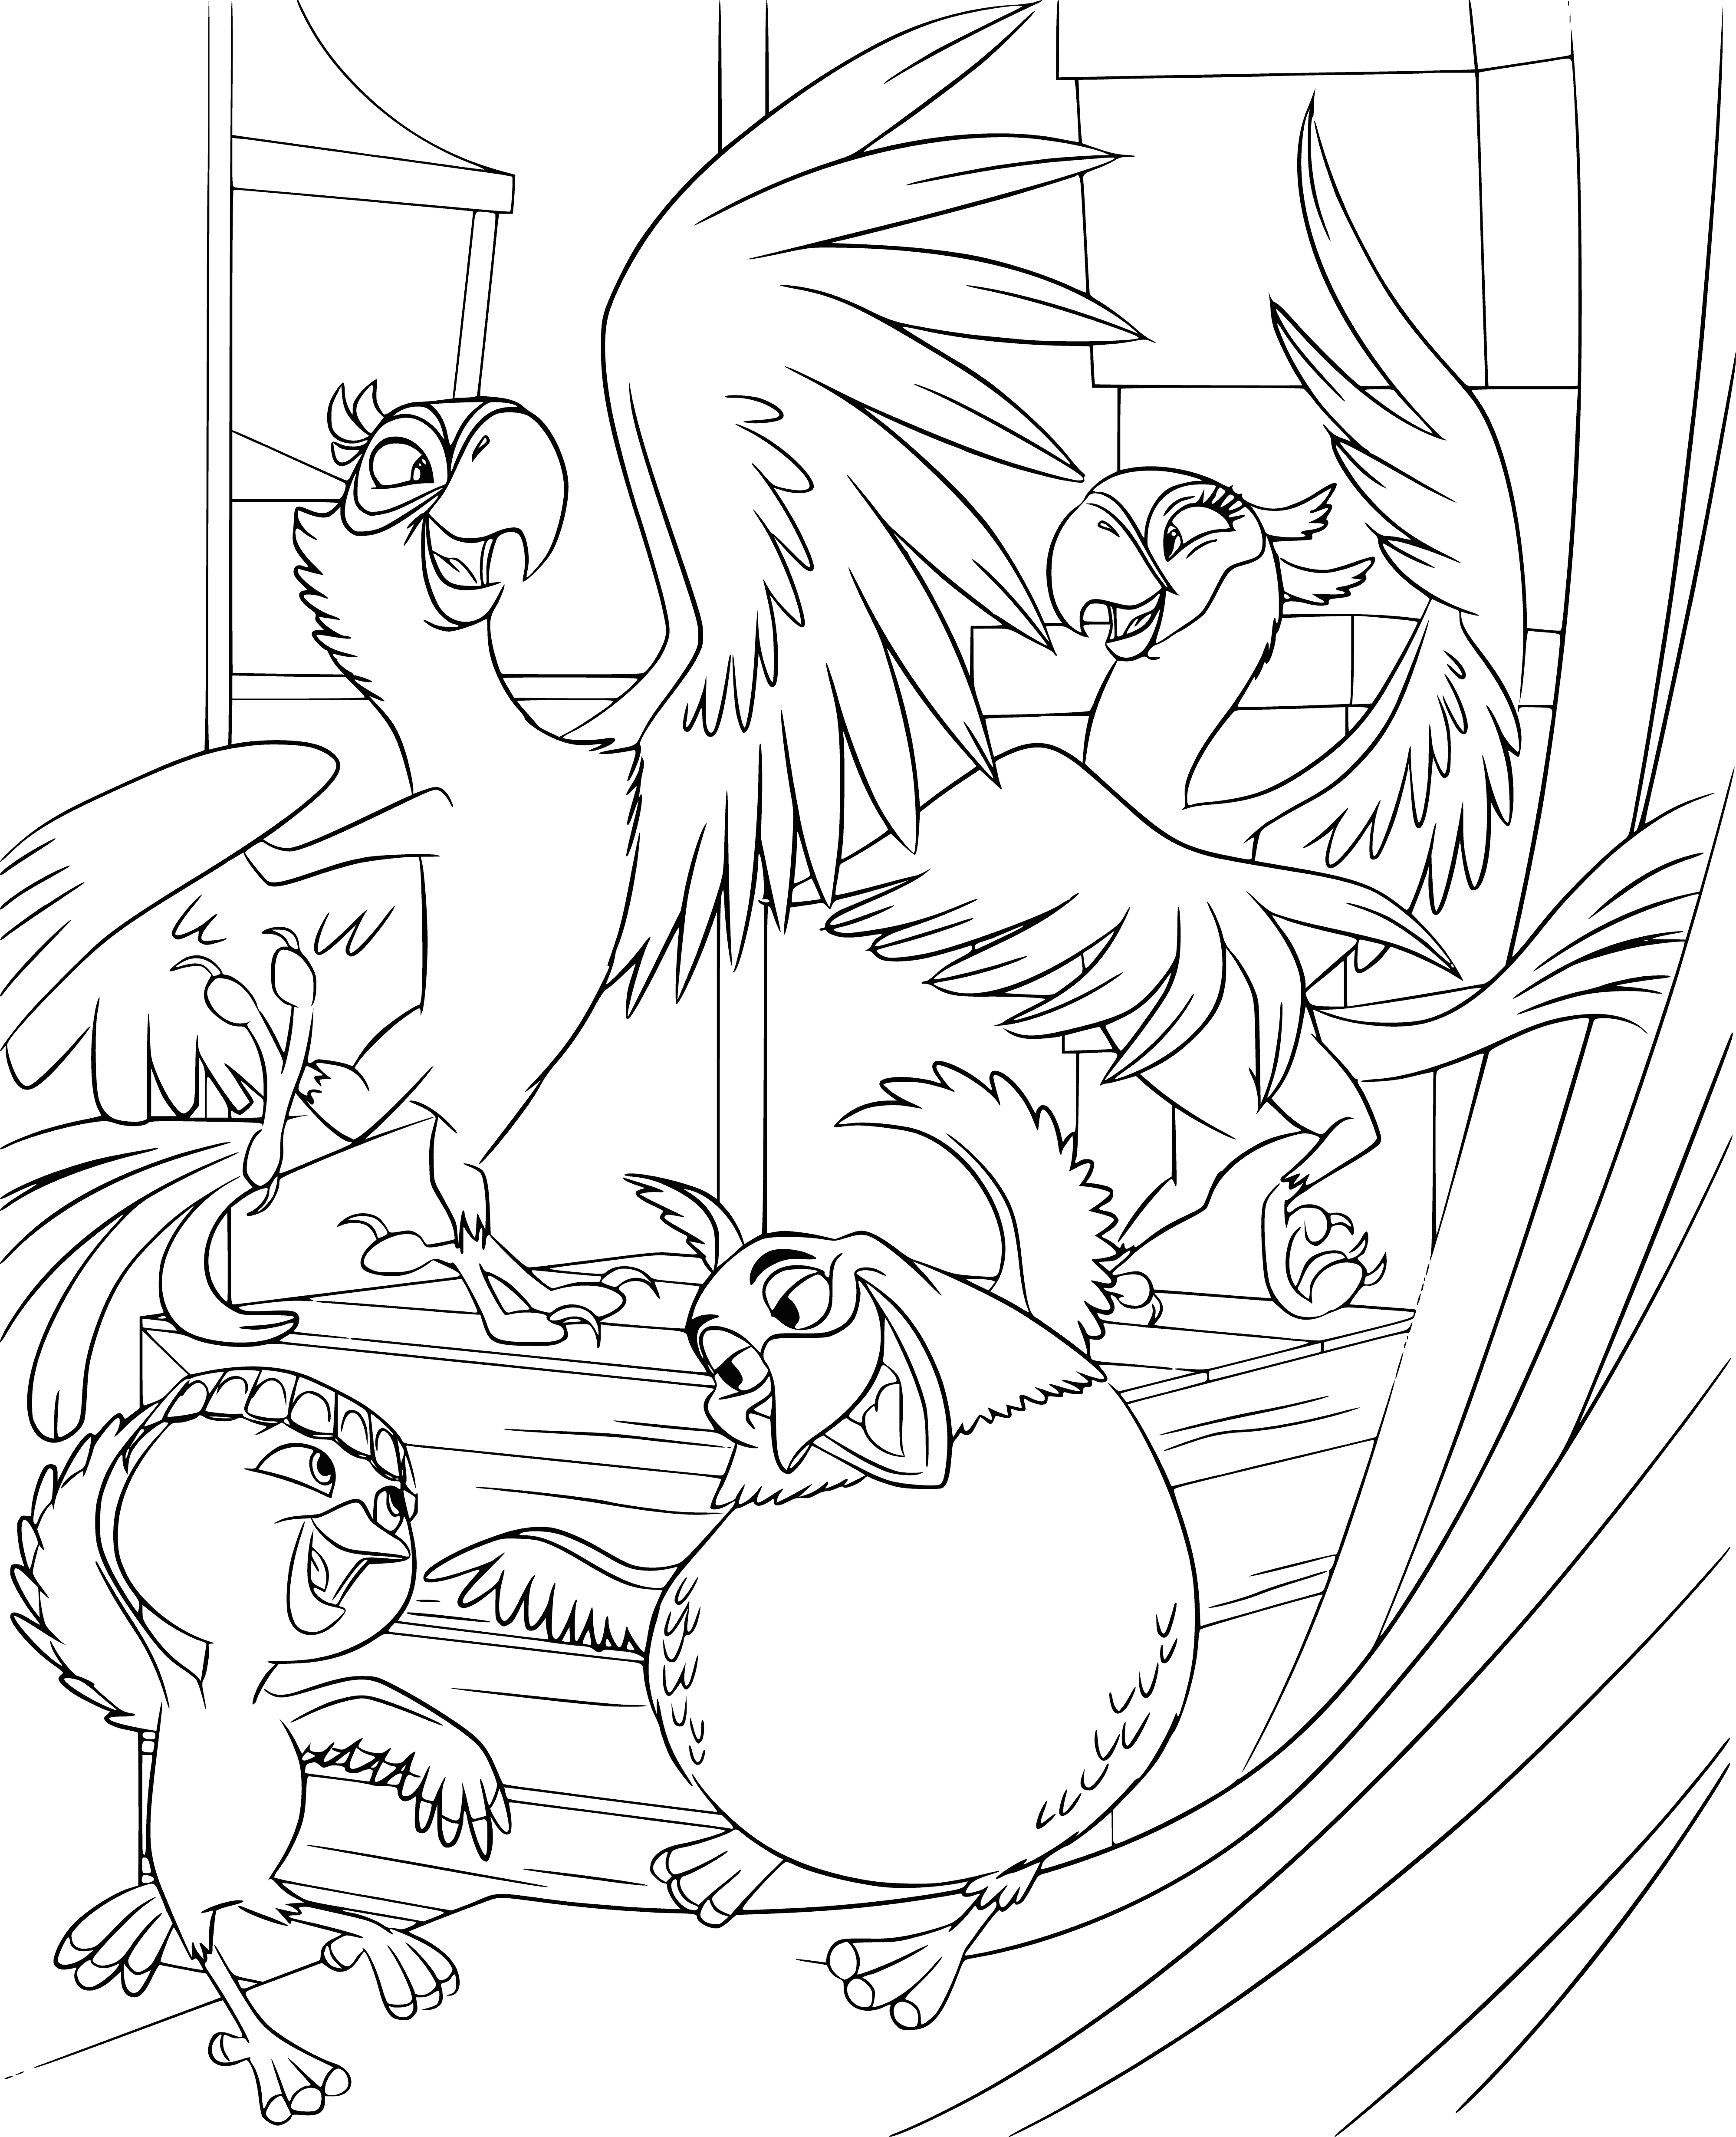 coloring page: Woman plays guitar on stairs in dress, backpack nearby.